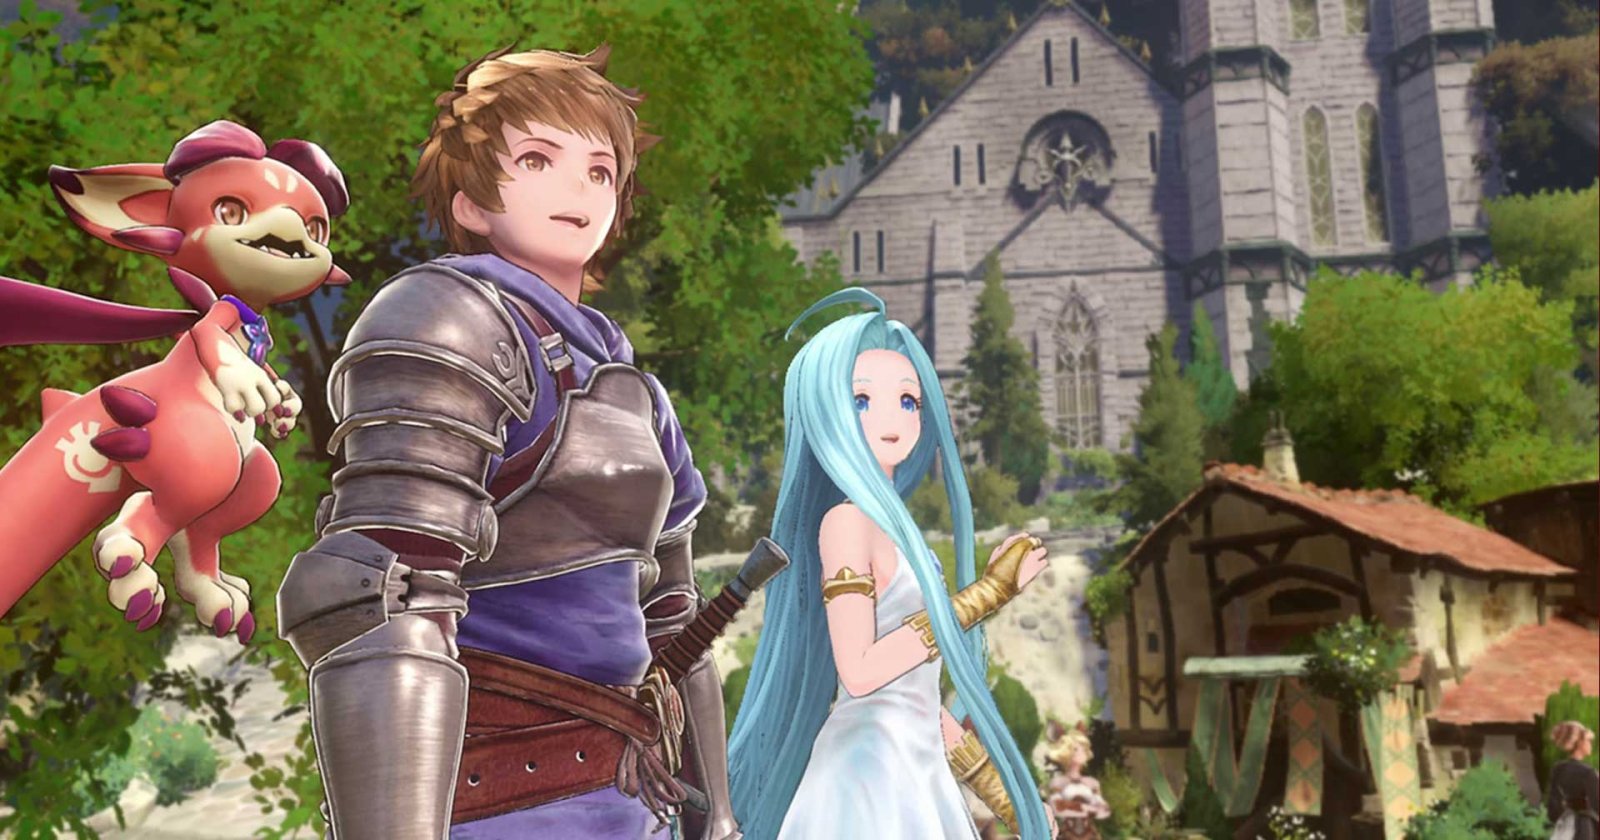 [Hands On] Granblue Fantasy: Relink จากตำนานเกมกาชาสู่เกม Action JRPG ระดับ AAA